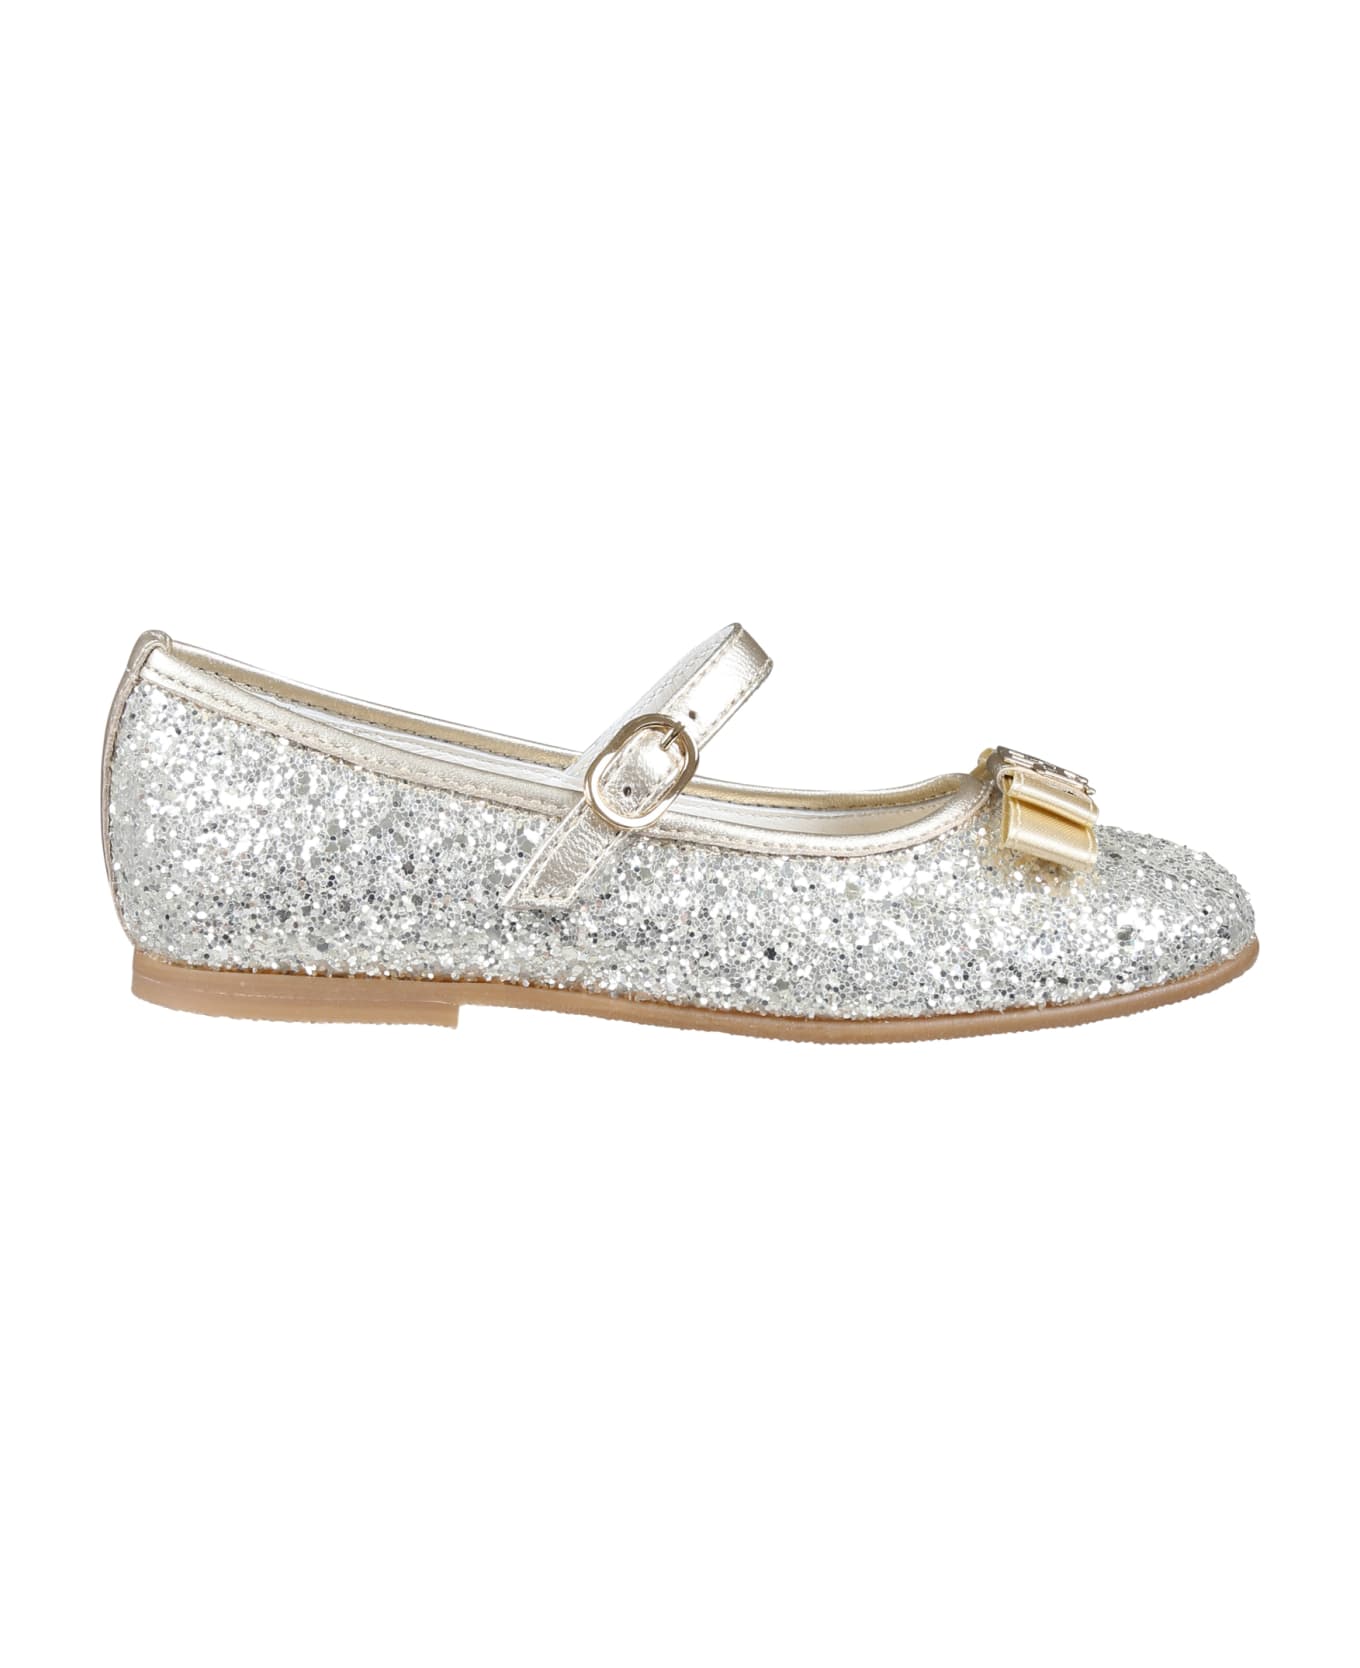 Tommy Hilfiger Gold Ballerines For Girl With Bow And Logo - Gold シューズ